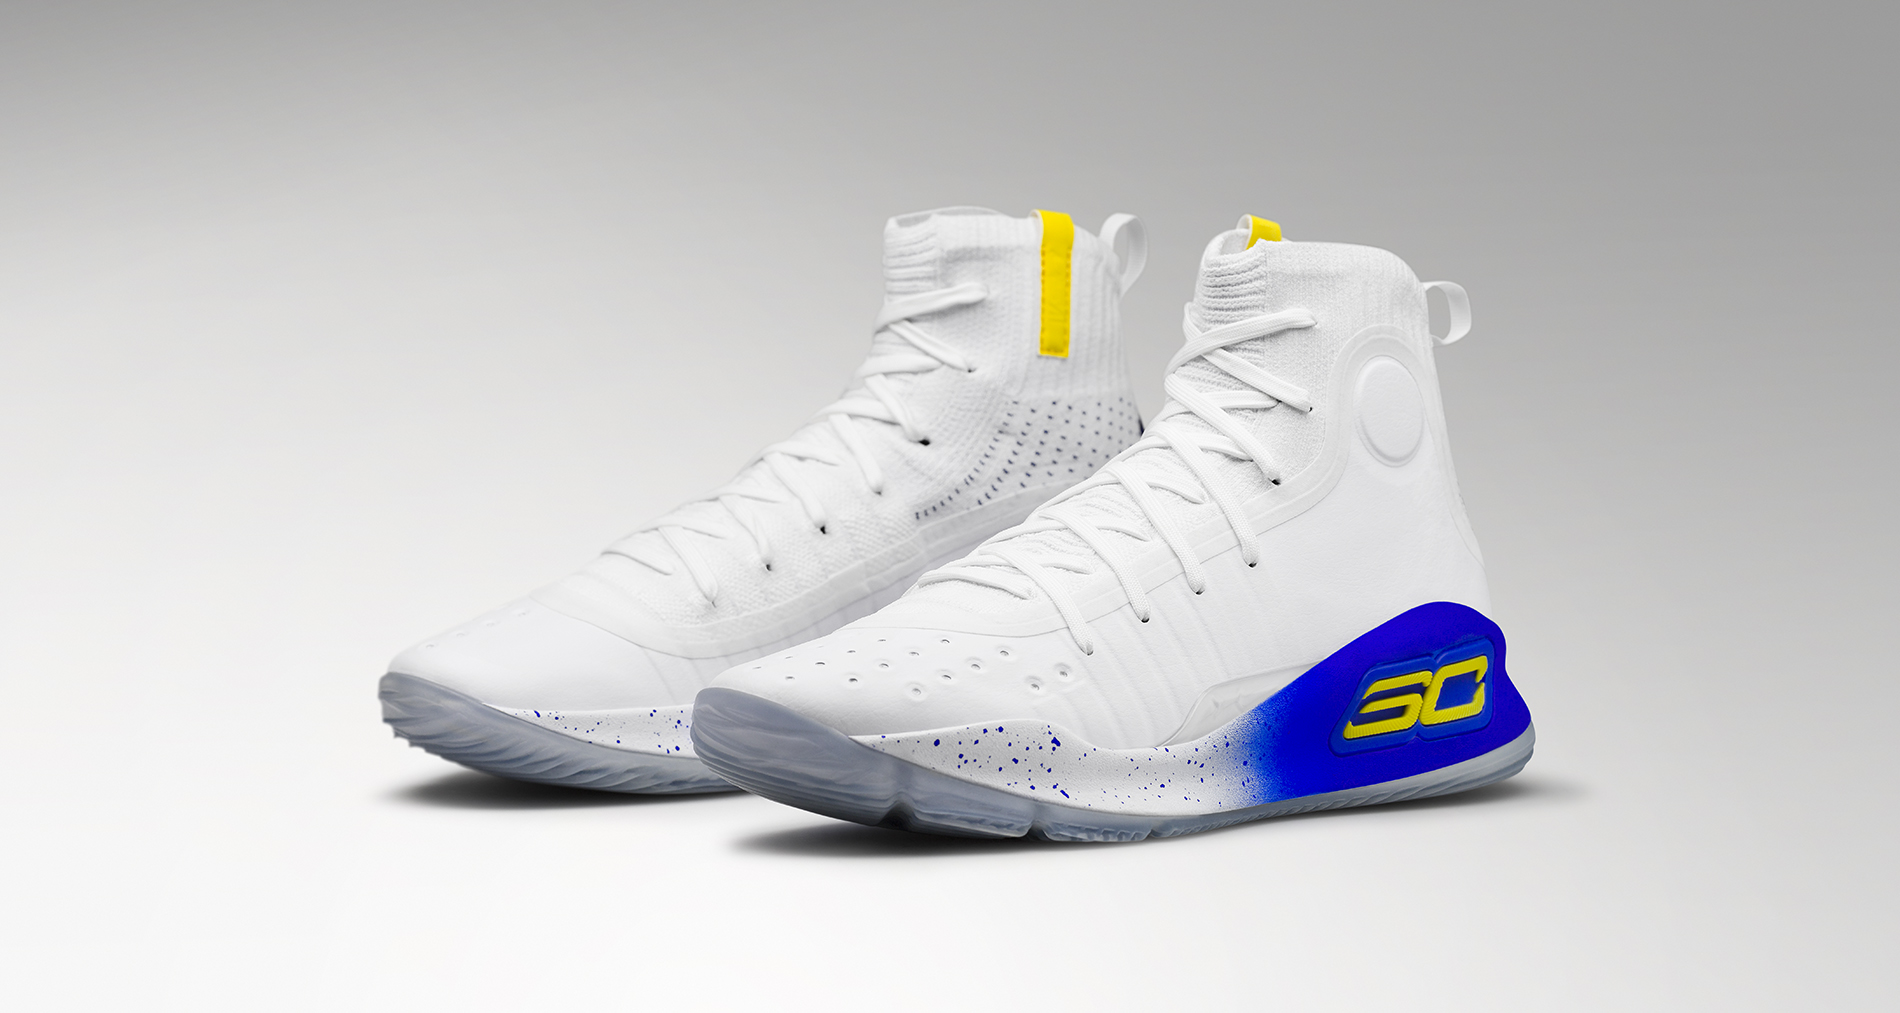 curry 4 gray